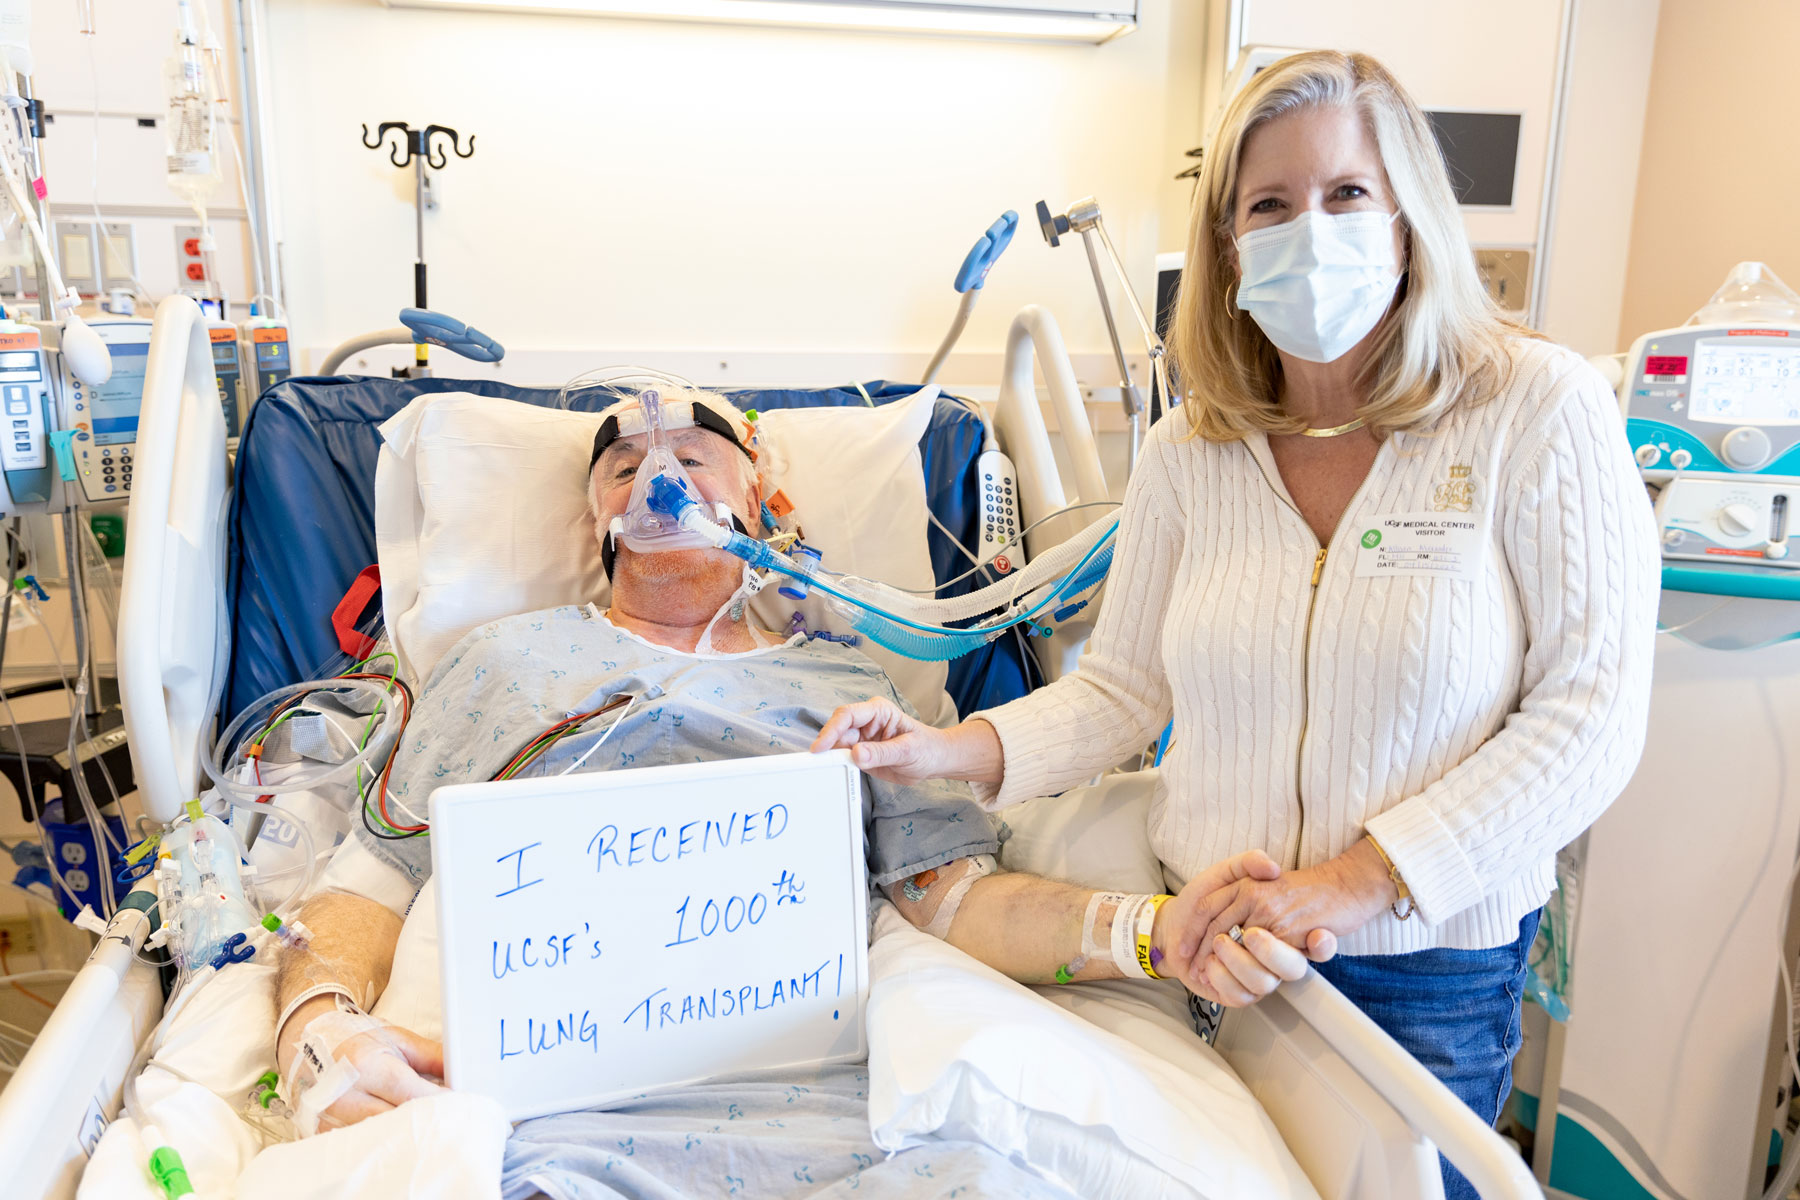 UCSF Lung Transplant Patient No. 1,000 Looks Ahead to More of the Good